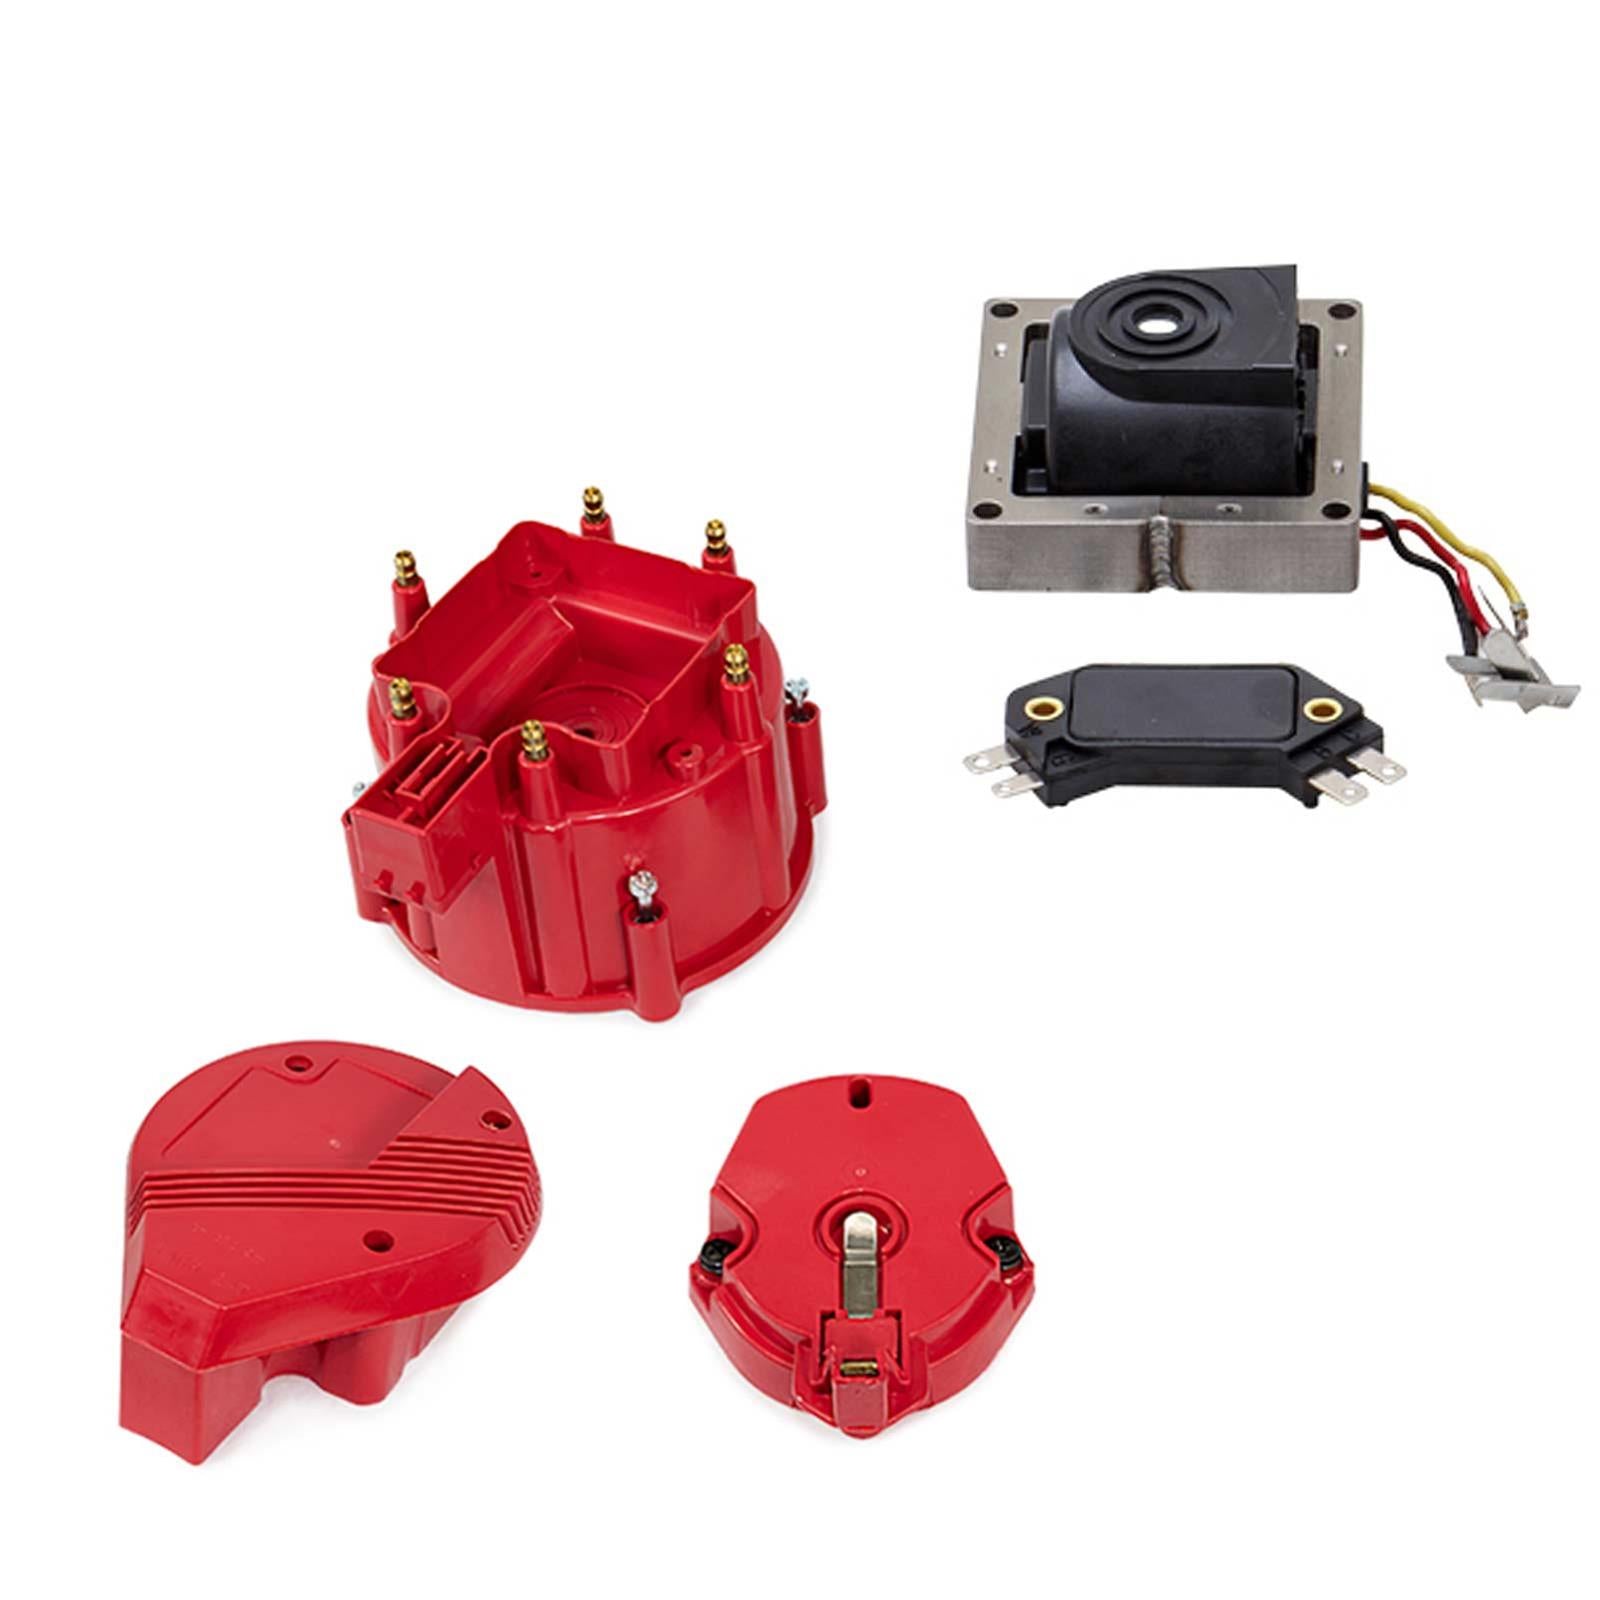 Top Street Performance JM6993R-KT HEI Distributor Tune-Up Kit - OEM Cap/Rotor, 65K Volt Coil and Module, 6 Cyl Red